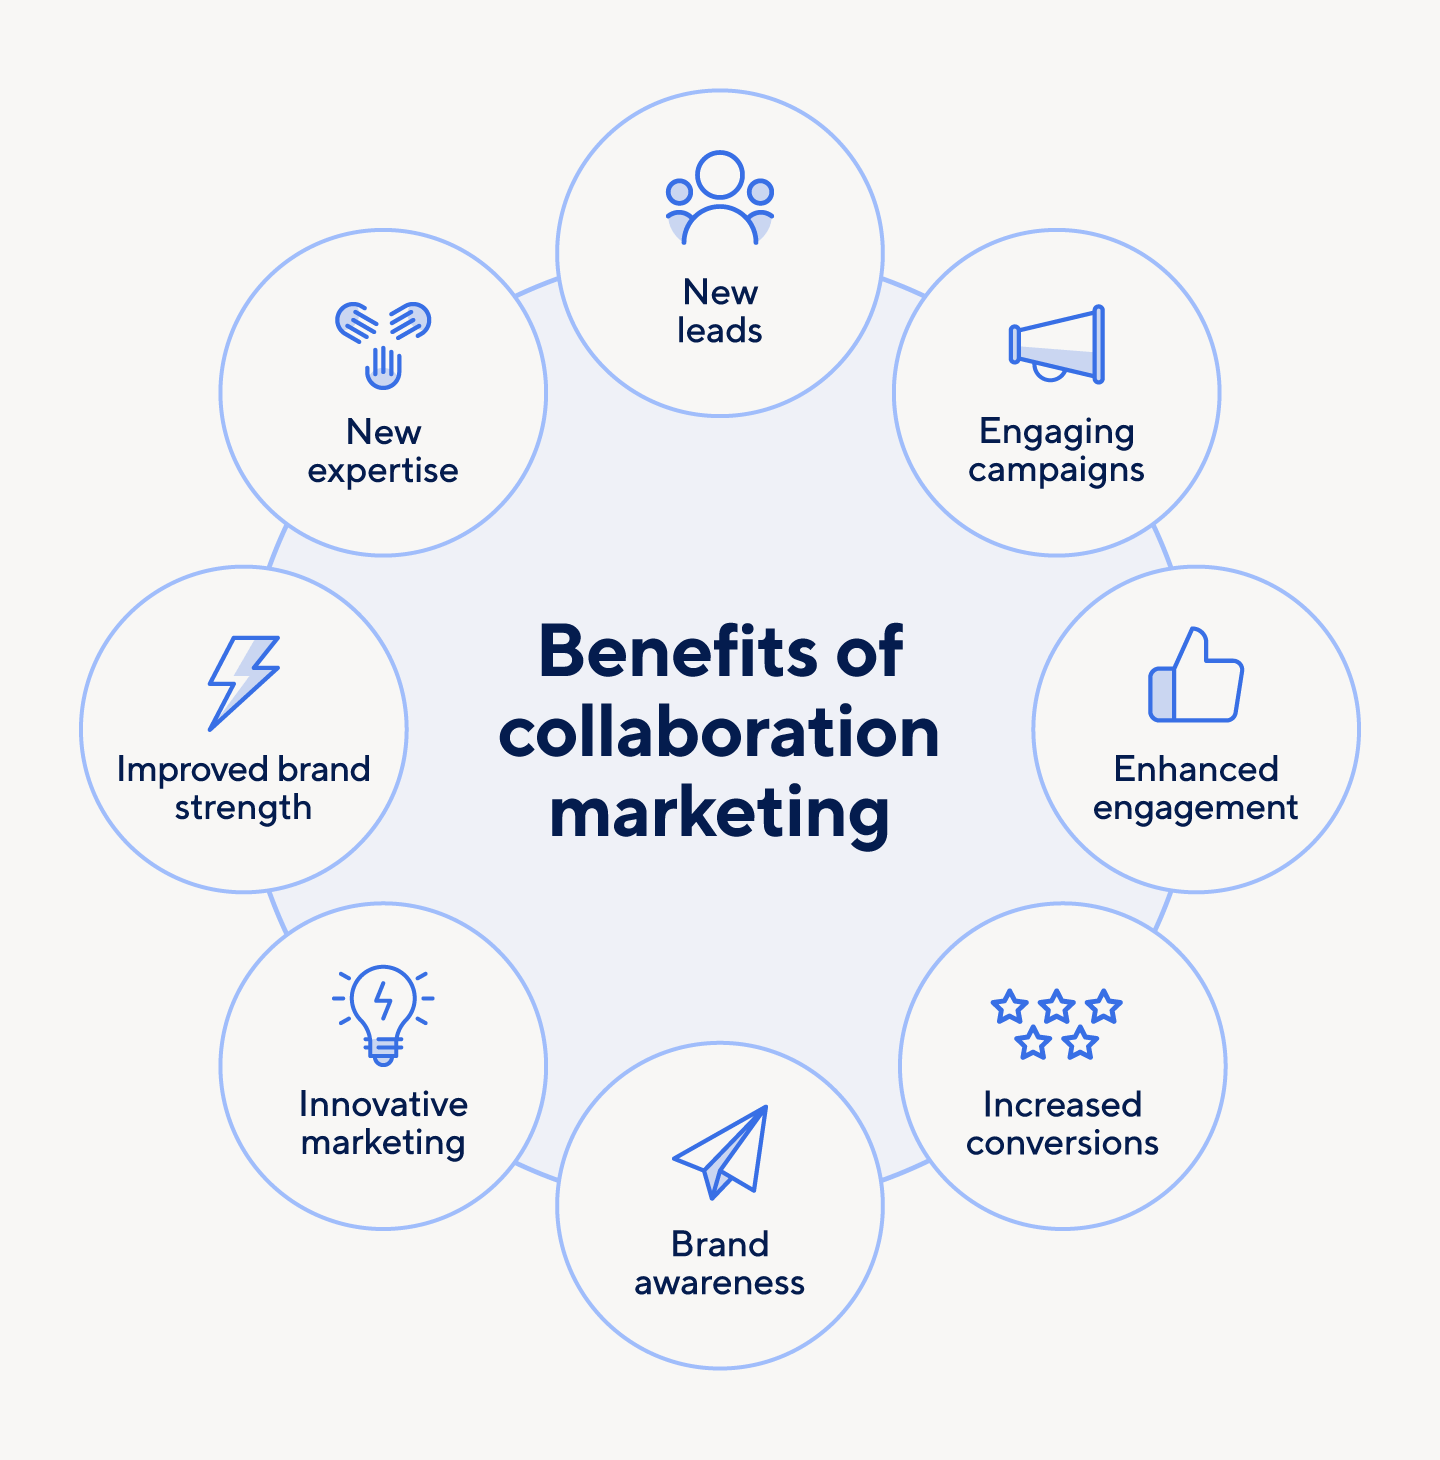 The benefits of collaboration marketing include new leads and enhanced engagement.